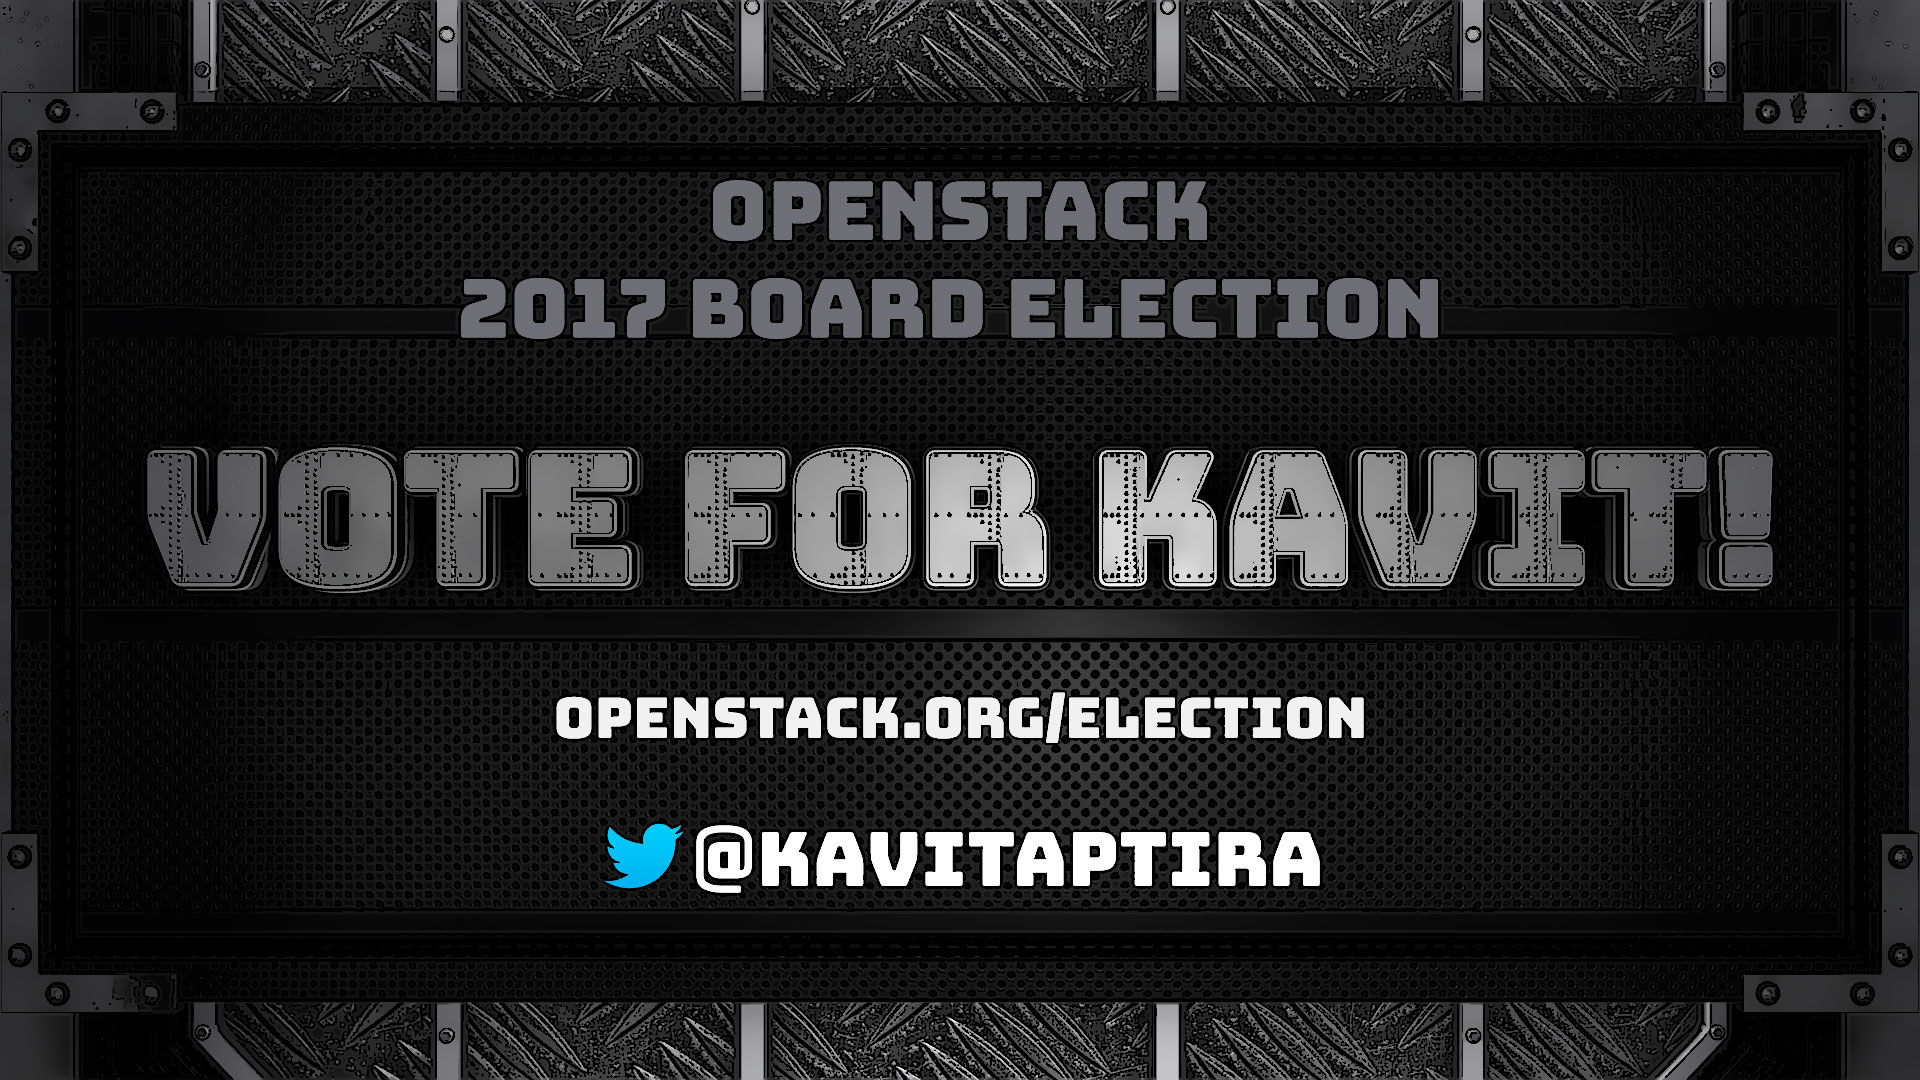 Support the APAC region - OpenStack Election 2017